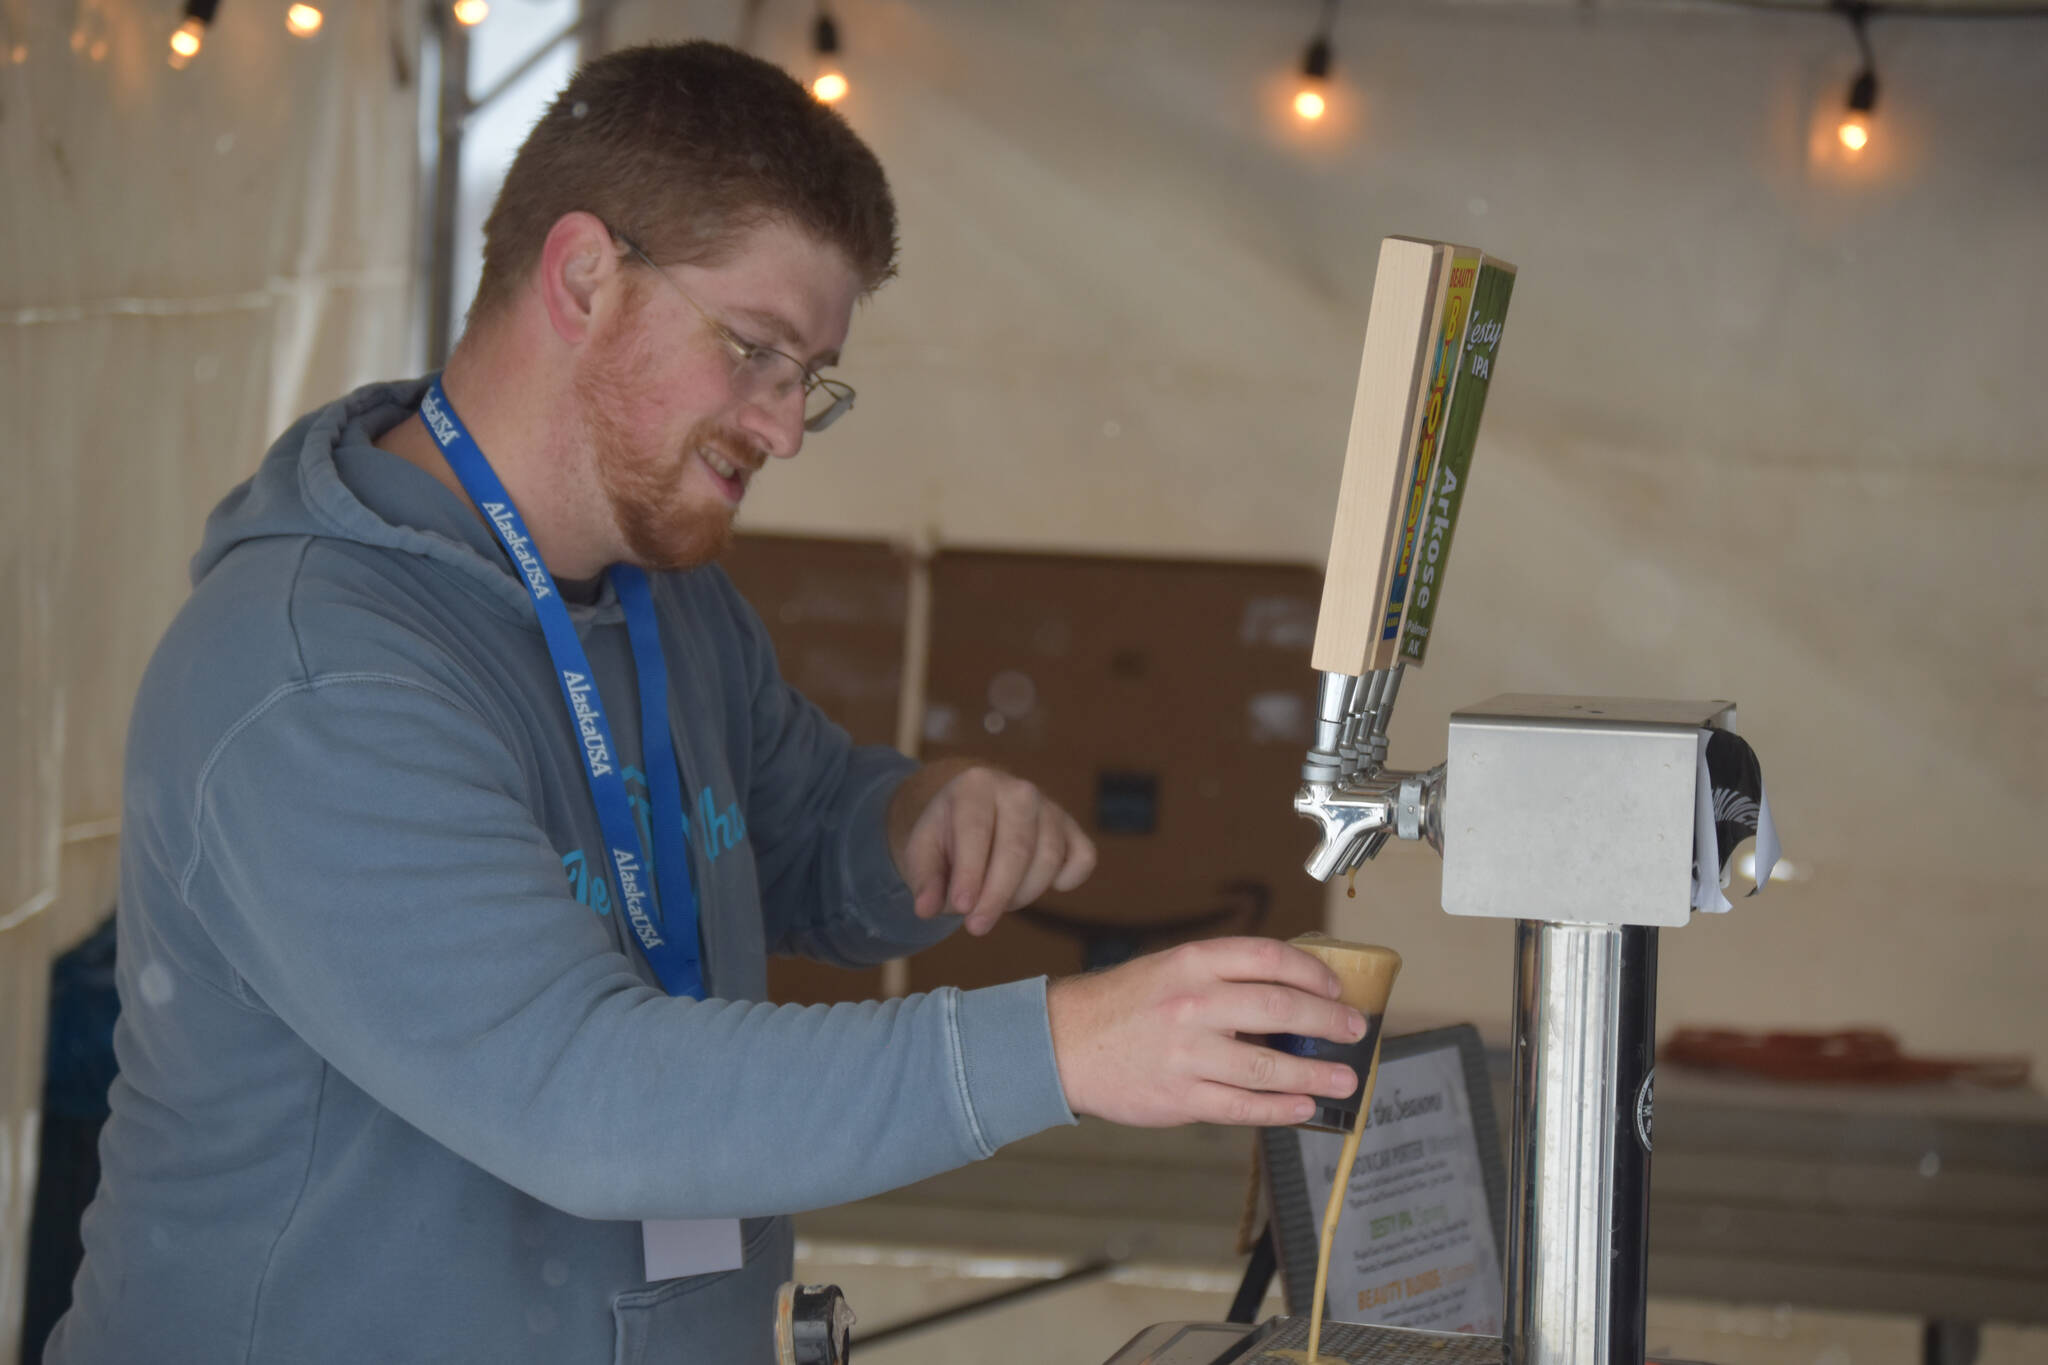 A brewer from Arkose Brewery fills a tasting cup during Frozen RiverFest on Saturday, Feb. 18, 2023 at Soldotna Creek Park in Soldotna, Alaska. (Jake Dye/Peninsula Clarion)